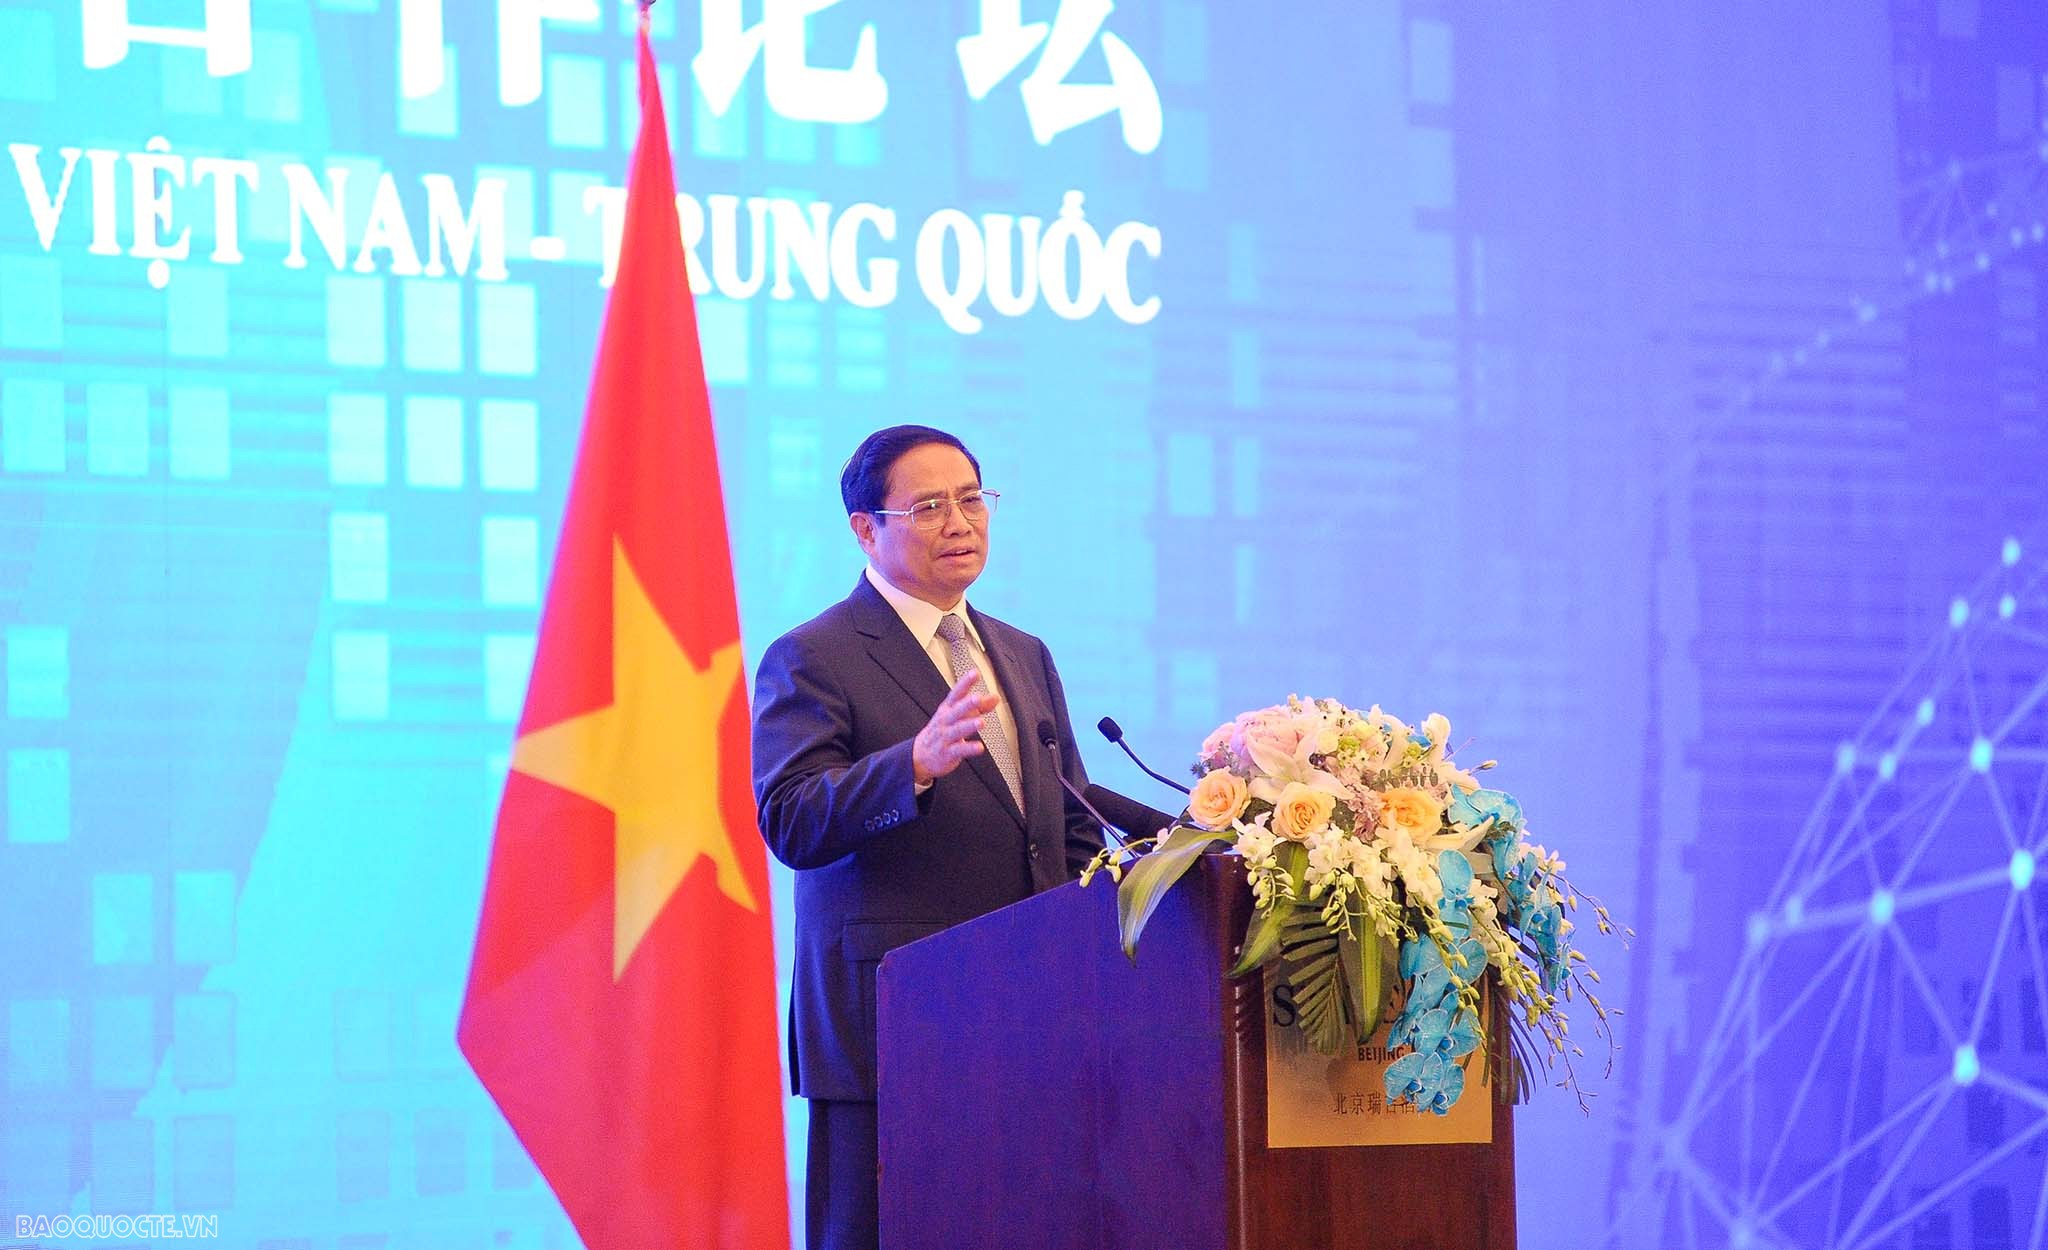 Prime Minister attends Vietnam - China Trade and Investment Cooperation Forum